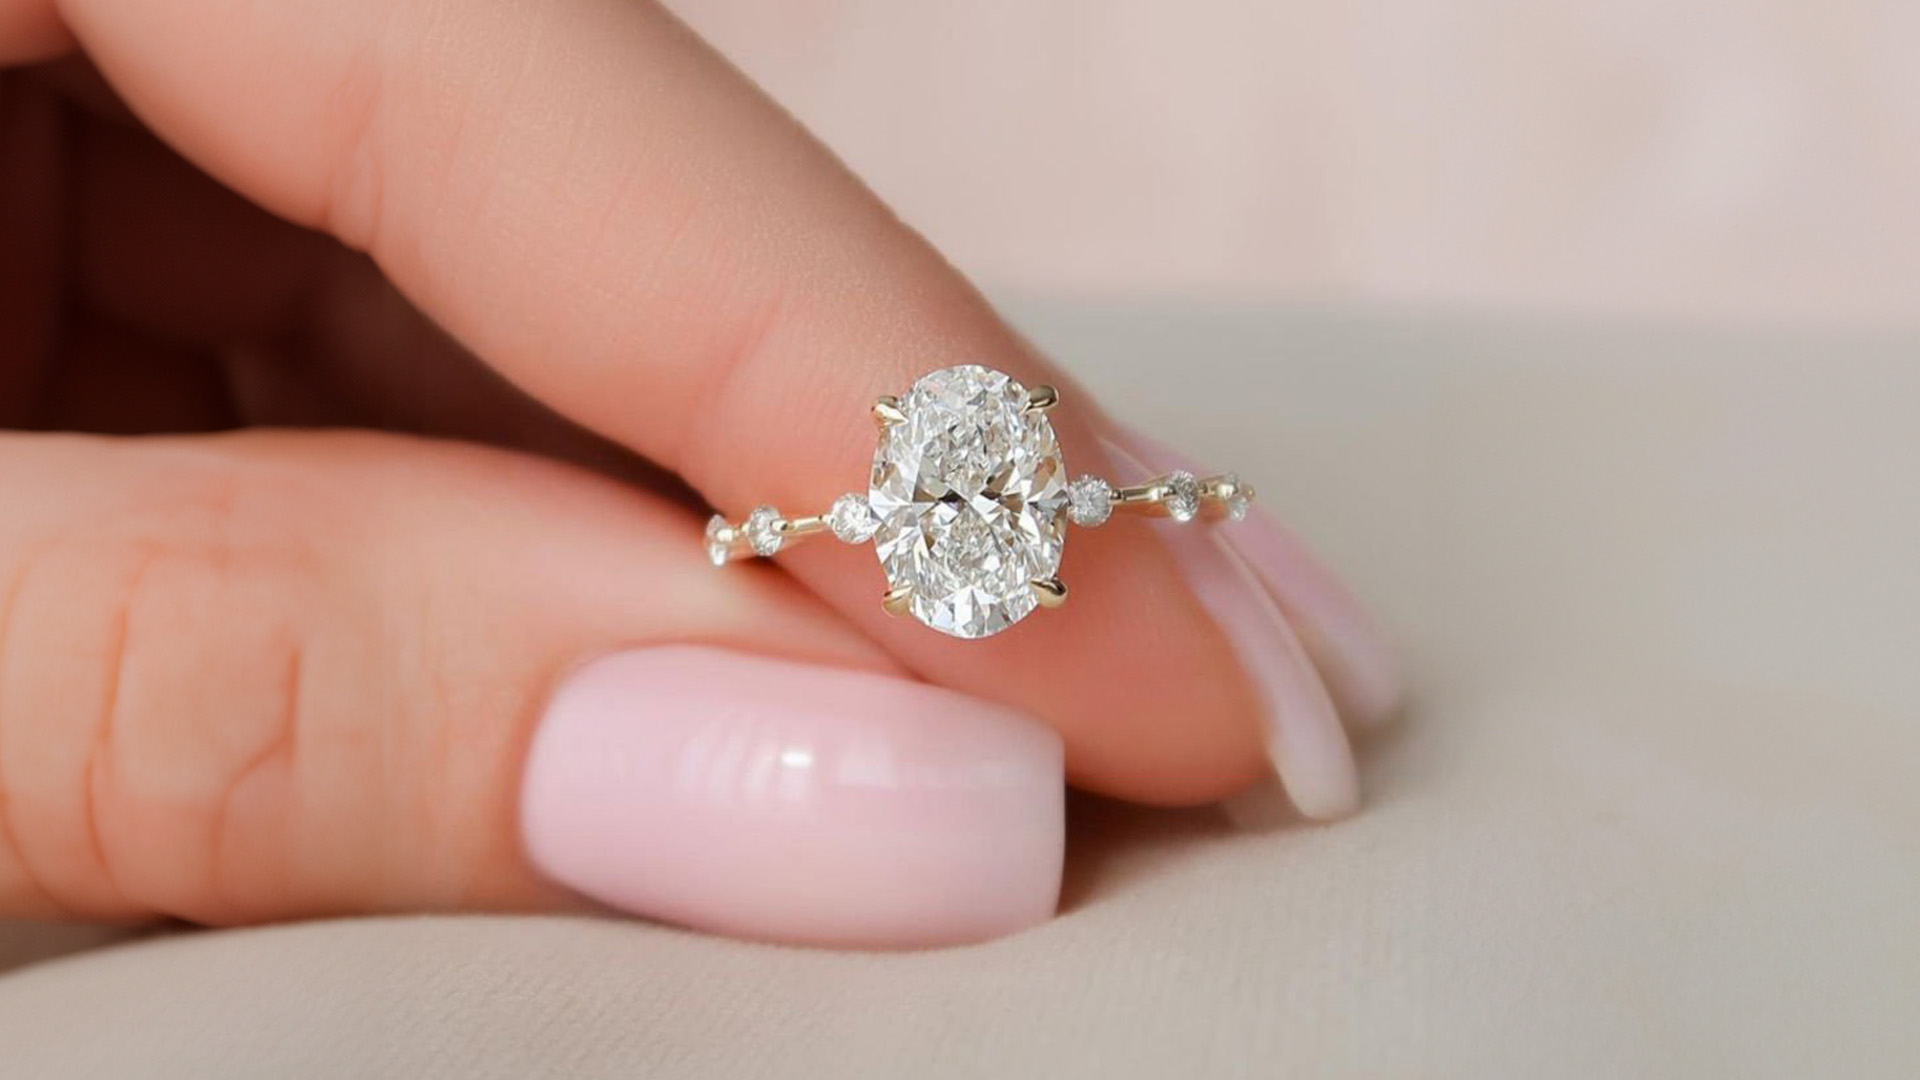 How to go about the custom engagement ring process in Dallas, TX